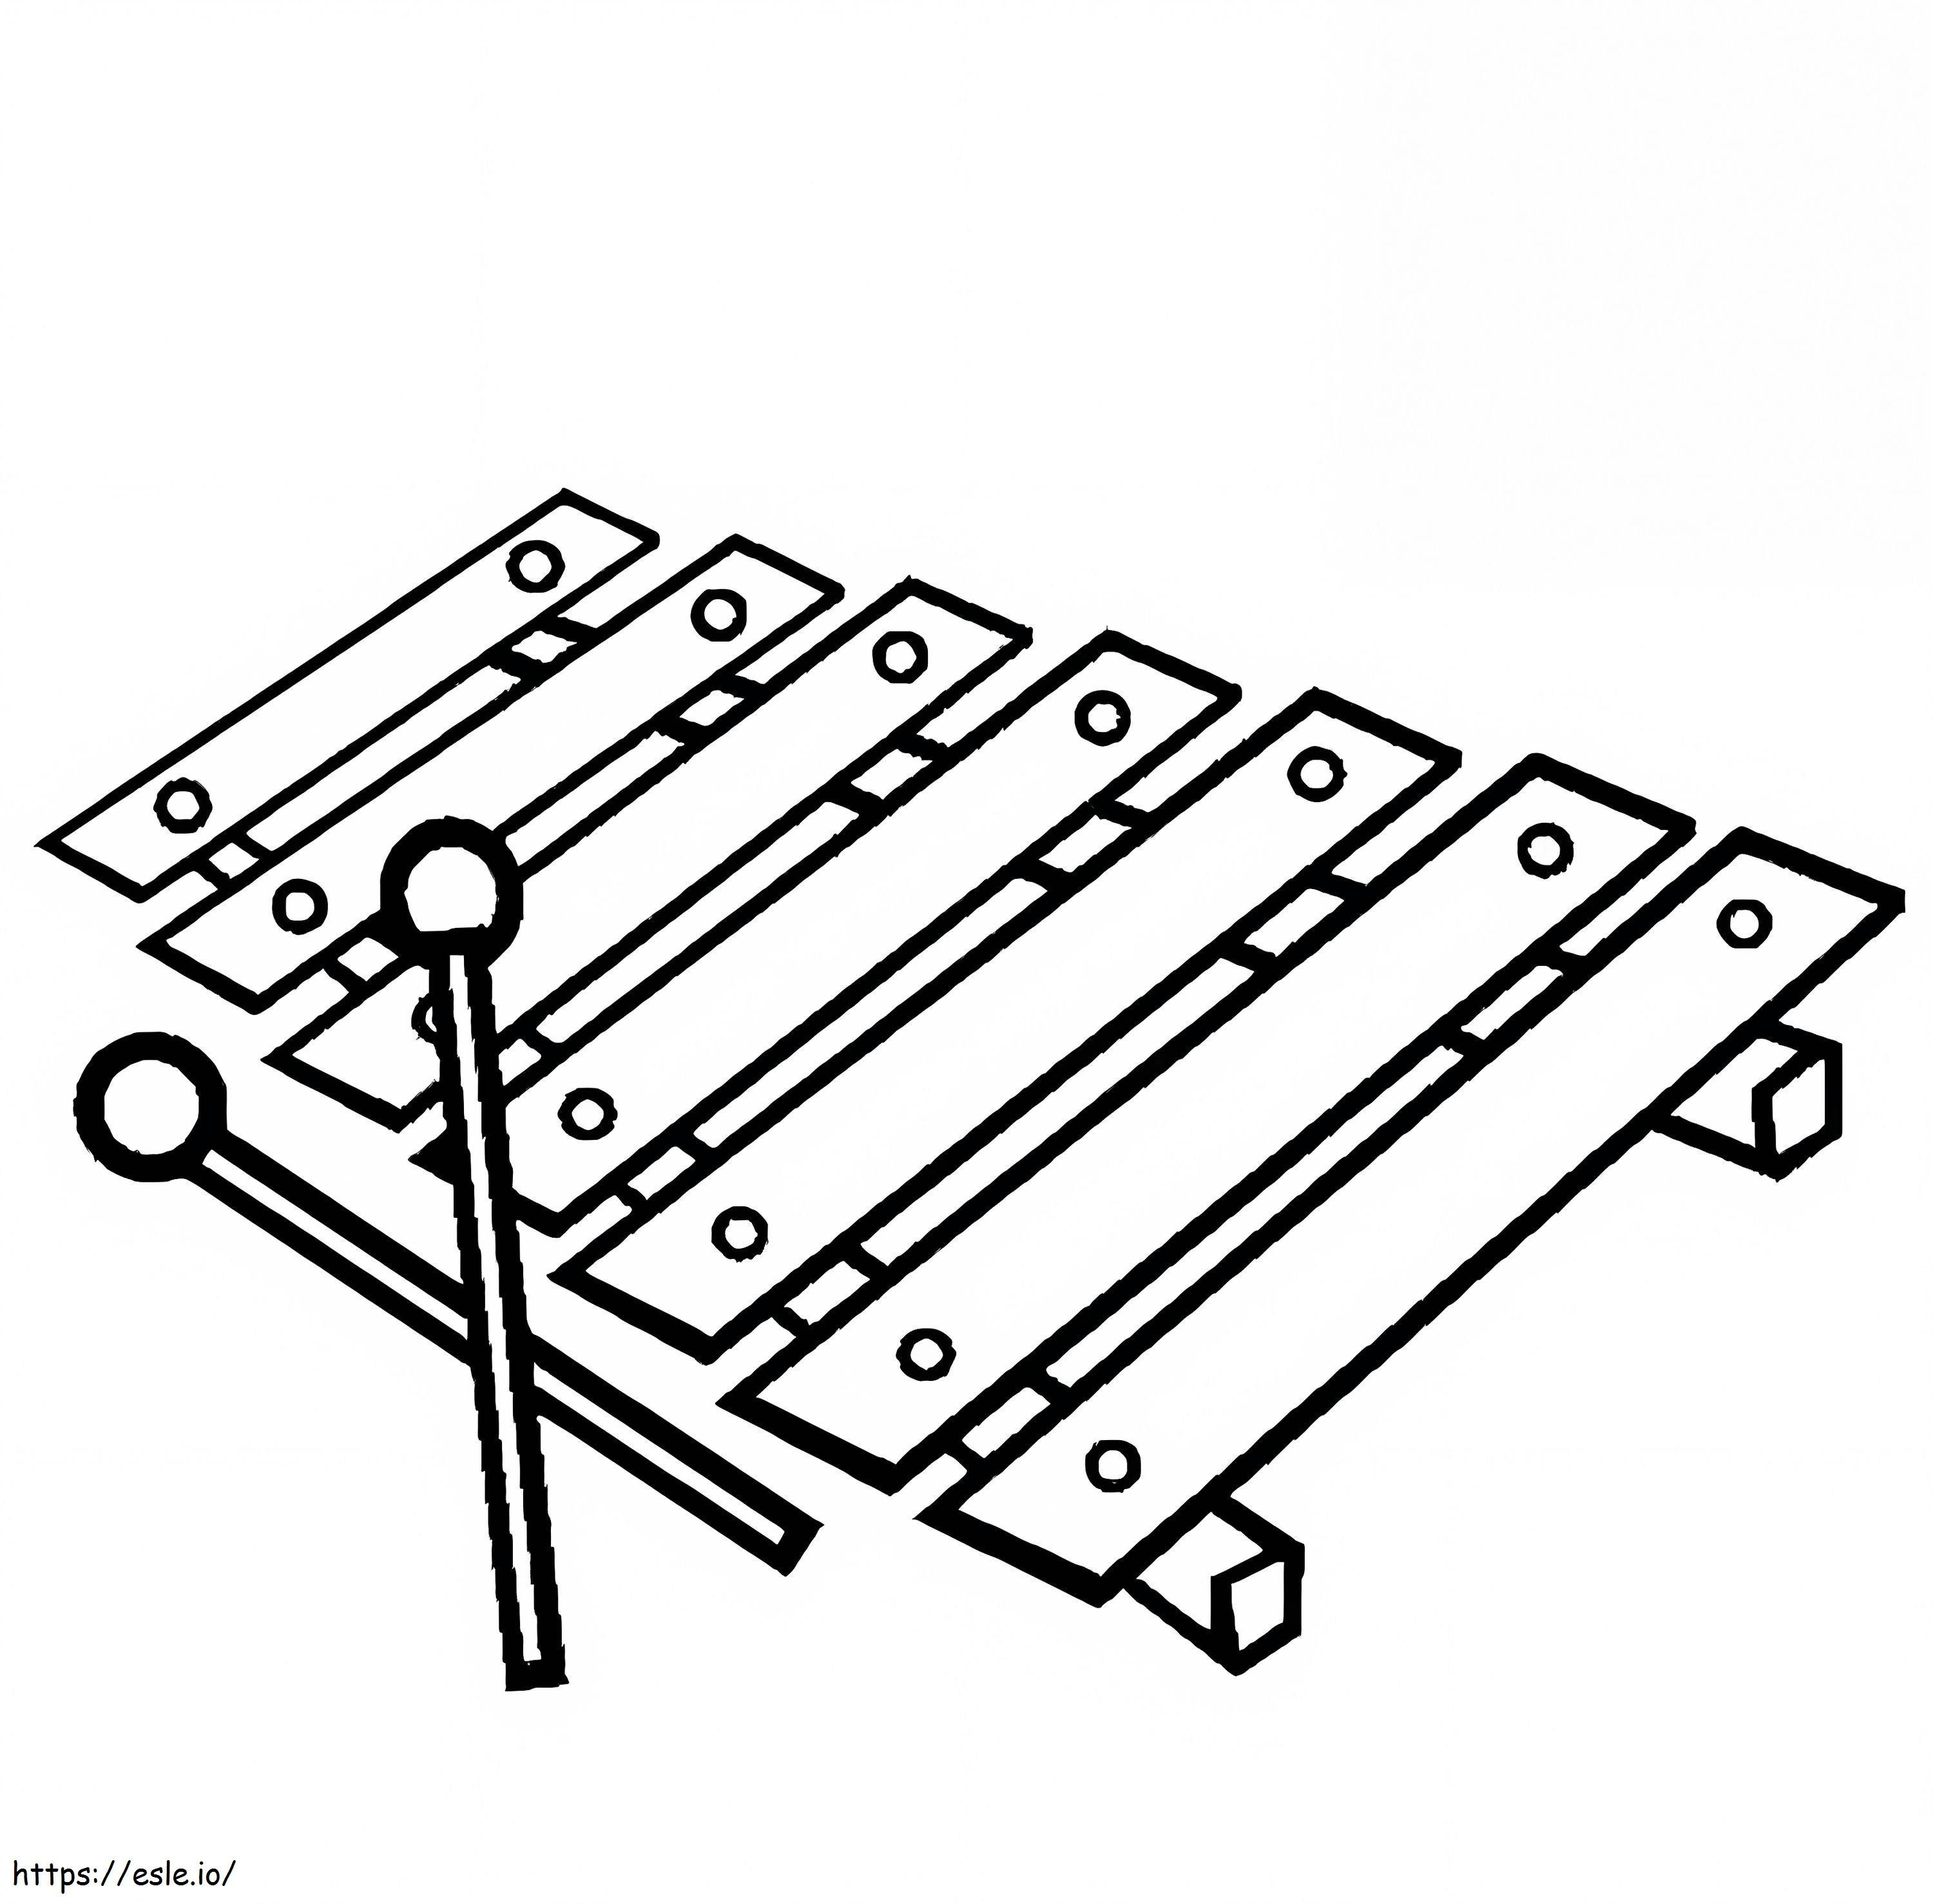 Xylophone Cartoon coloring page